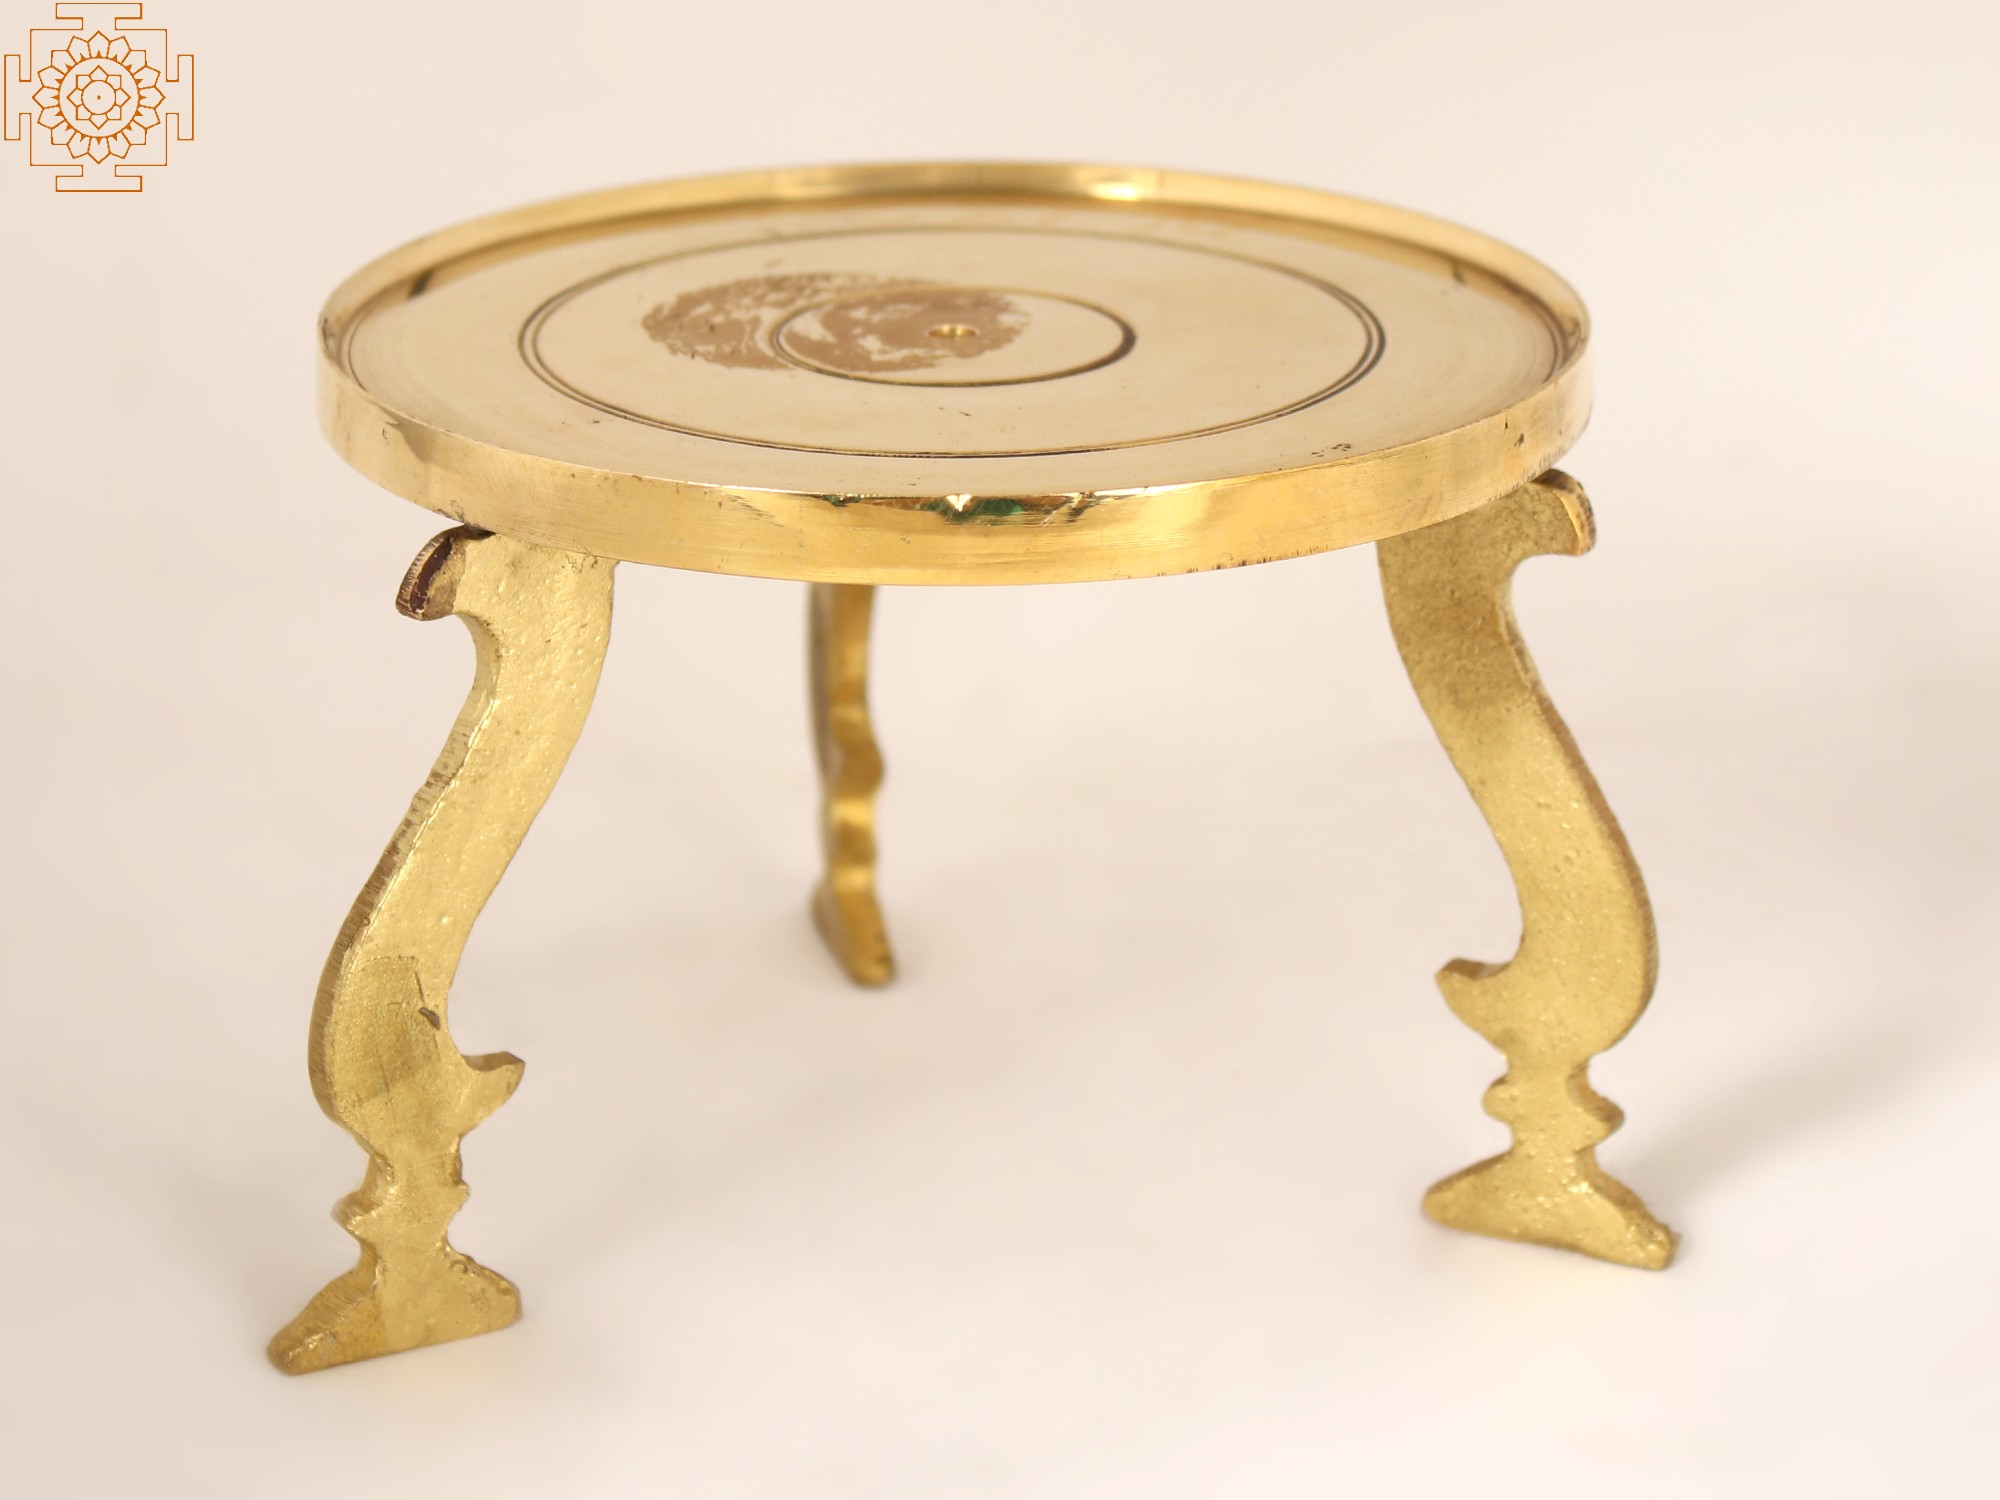 Handcrafted Brass Stand, Made in India